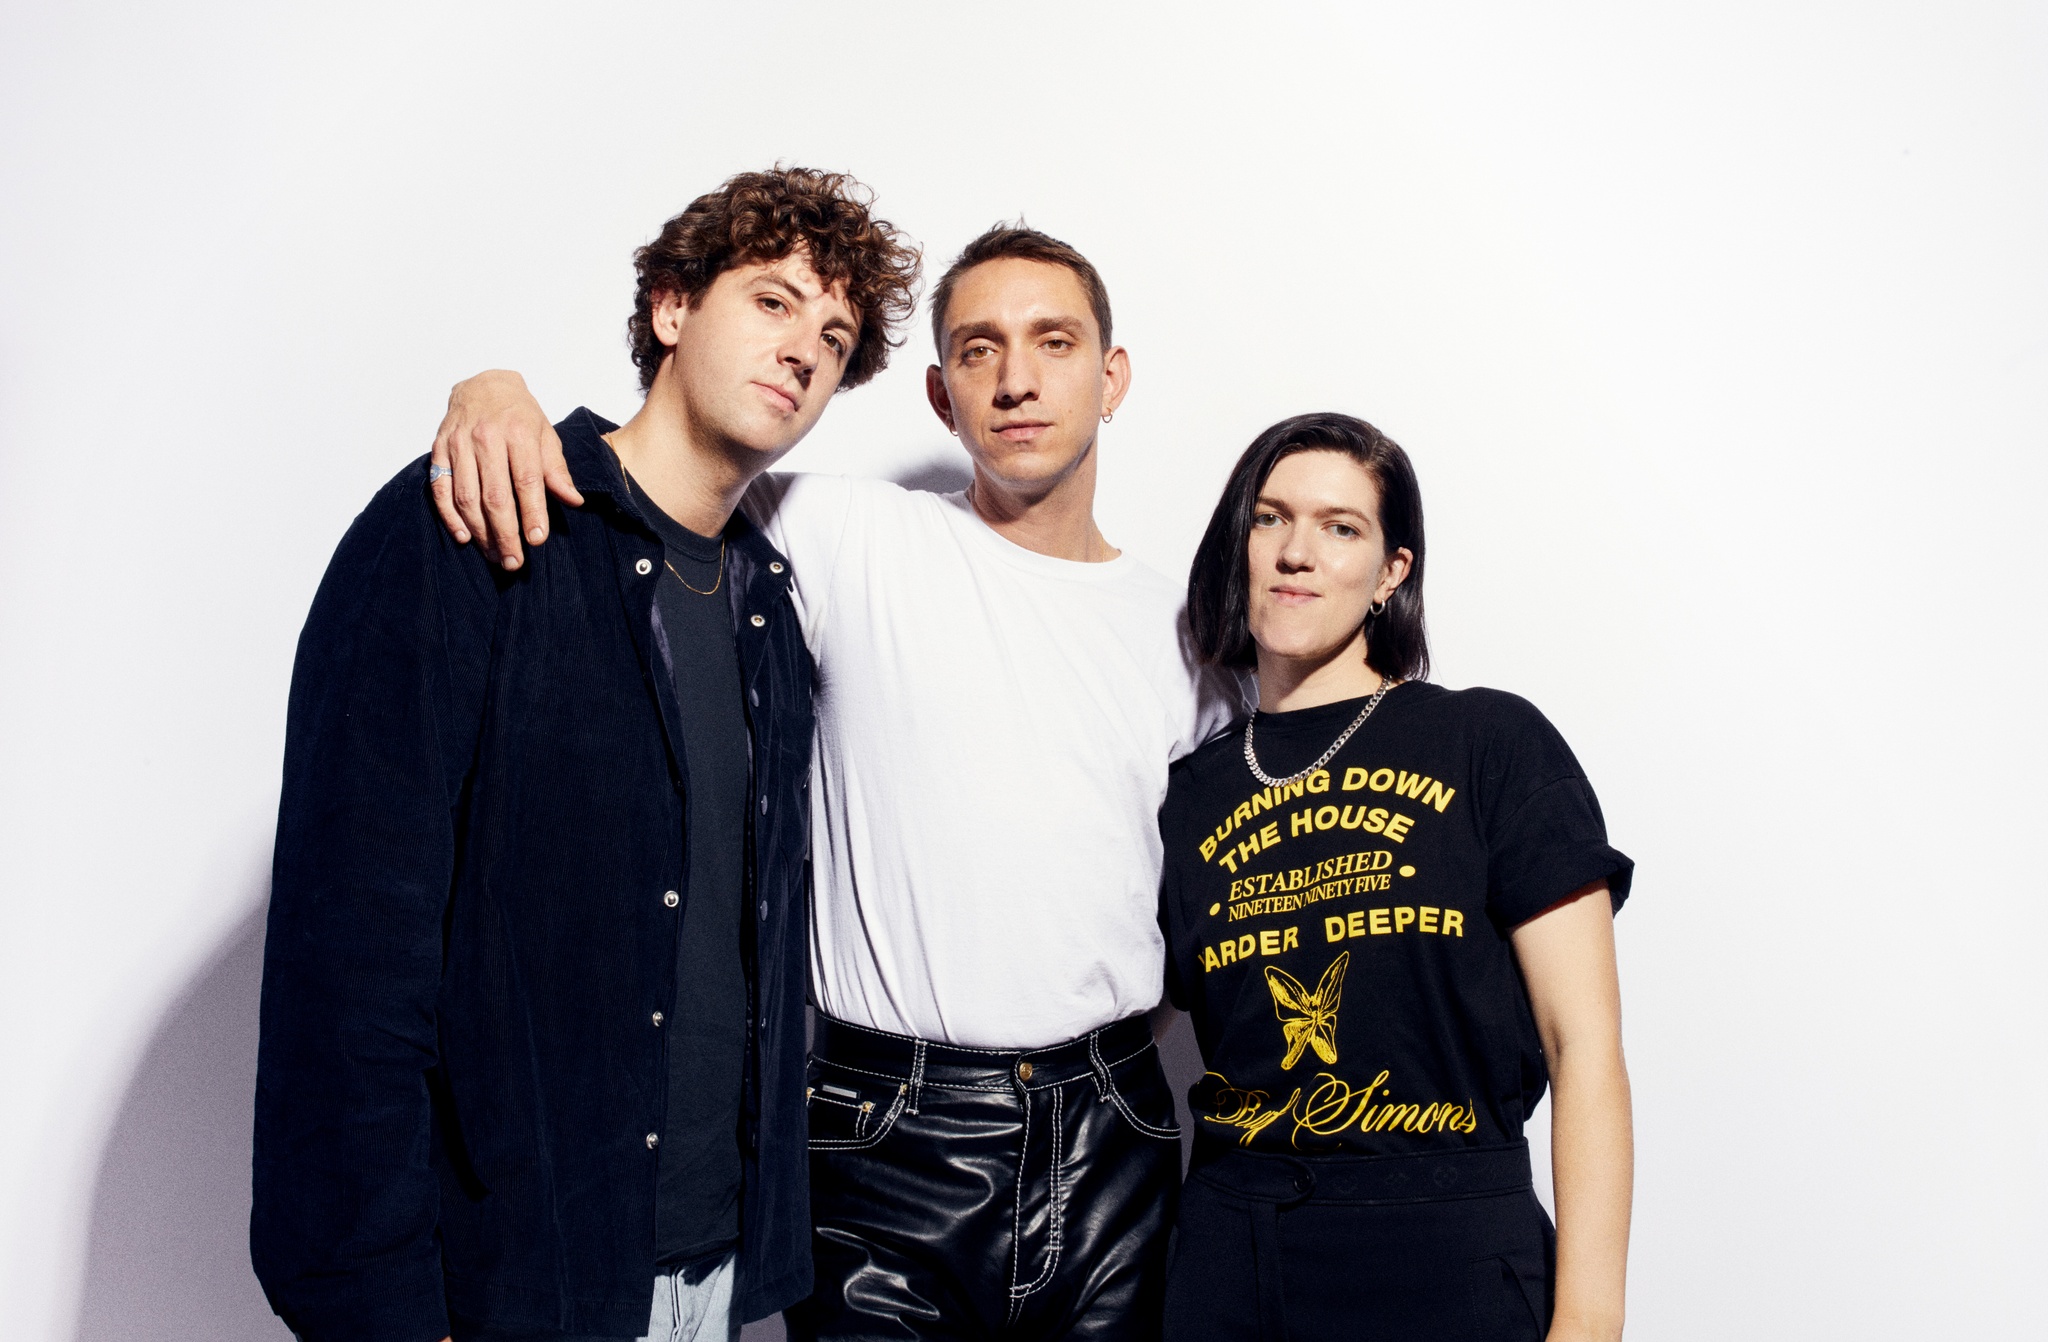 The three members of The xx standing against a white wall. One stands in the middle with his arms around the other two at either of his sides. The man in the middle wears a white shirt. On the left another man wears a dark shirt and jacket. On the right a woman with short brown hair wears a black tshirt. 